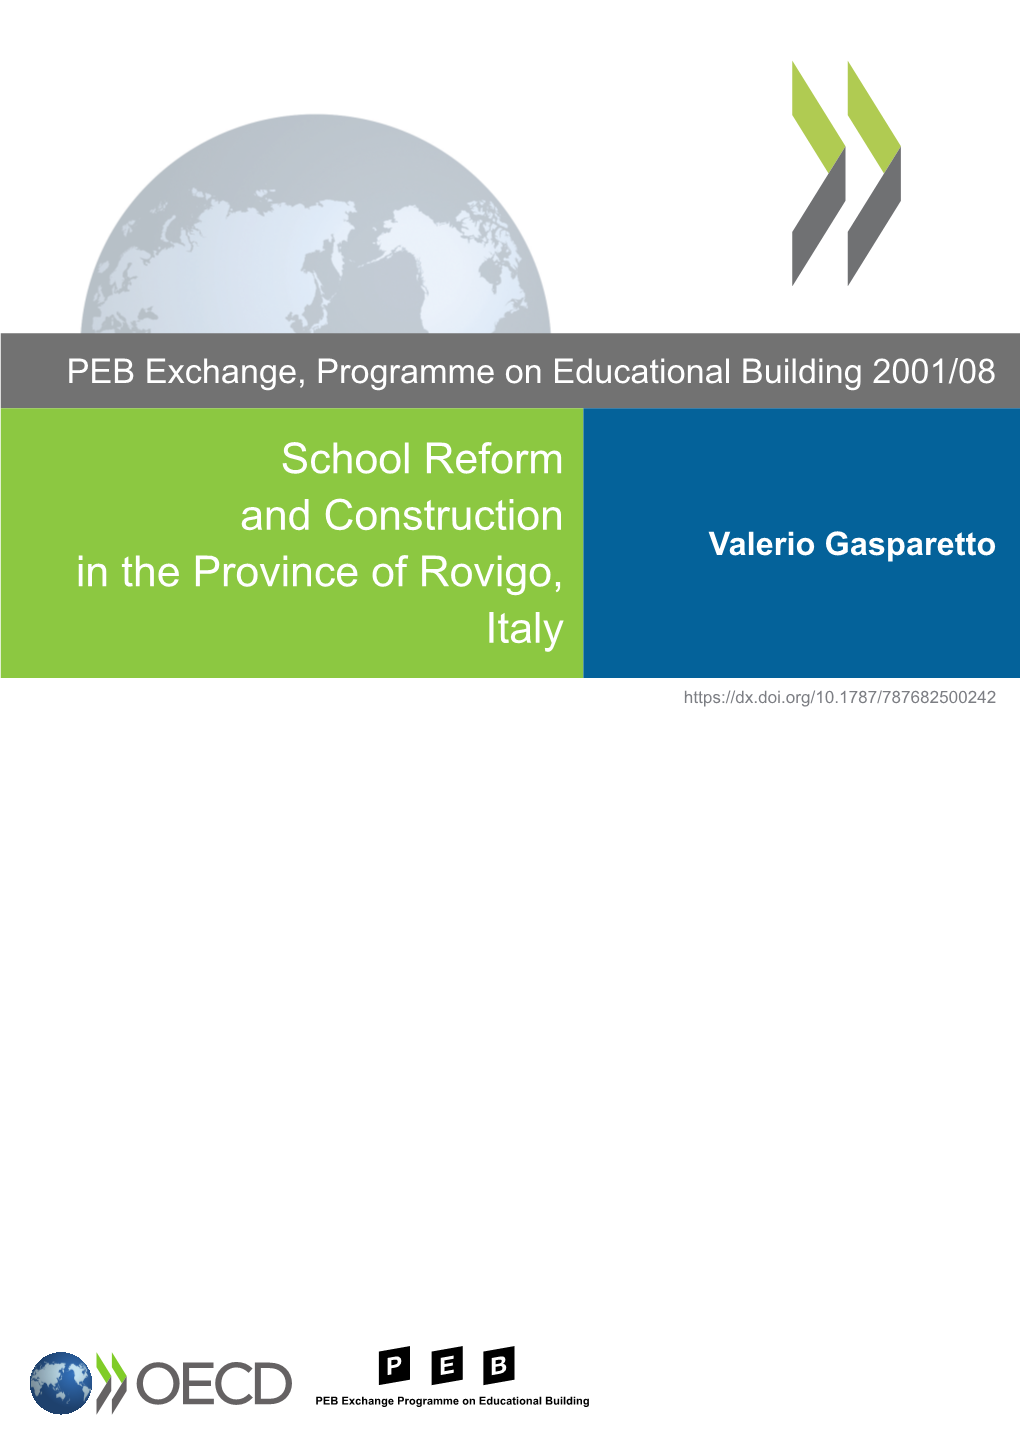 School Reform and Construction in the Province of Rovigo, Italy